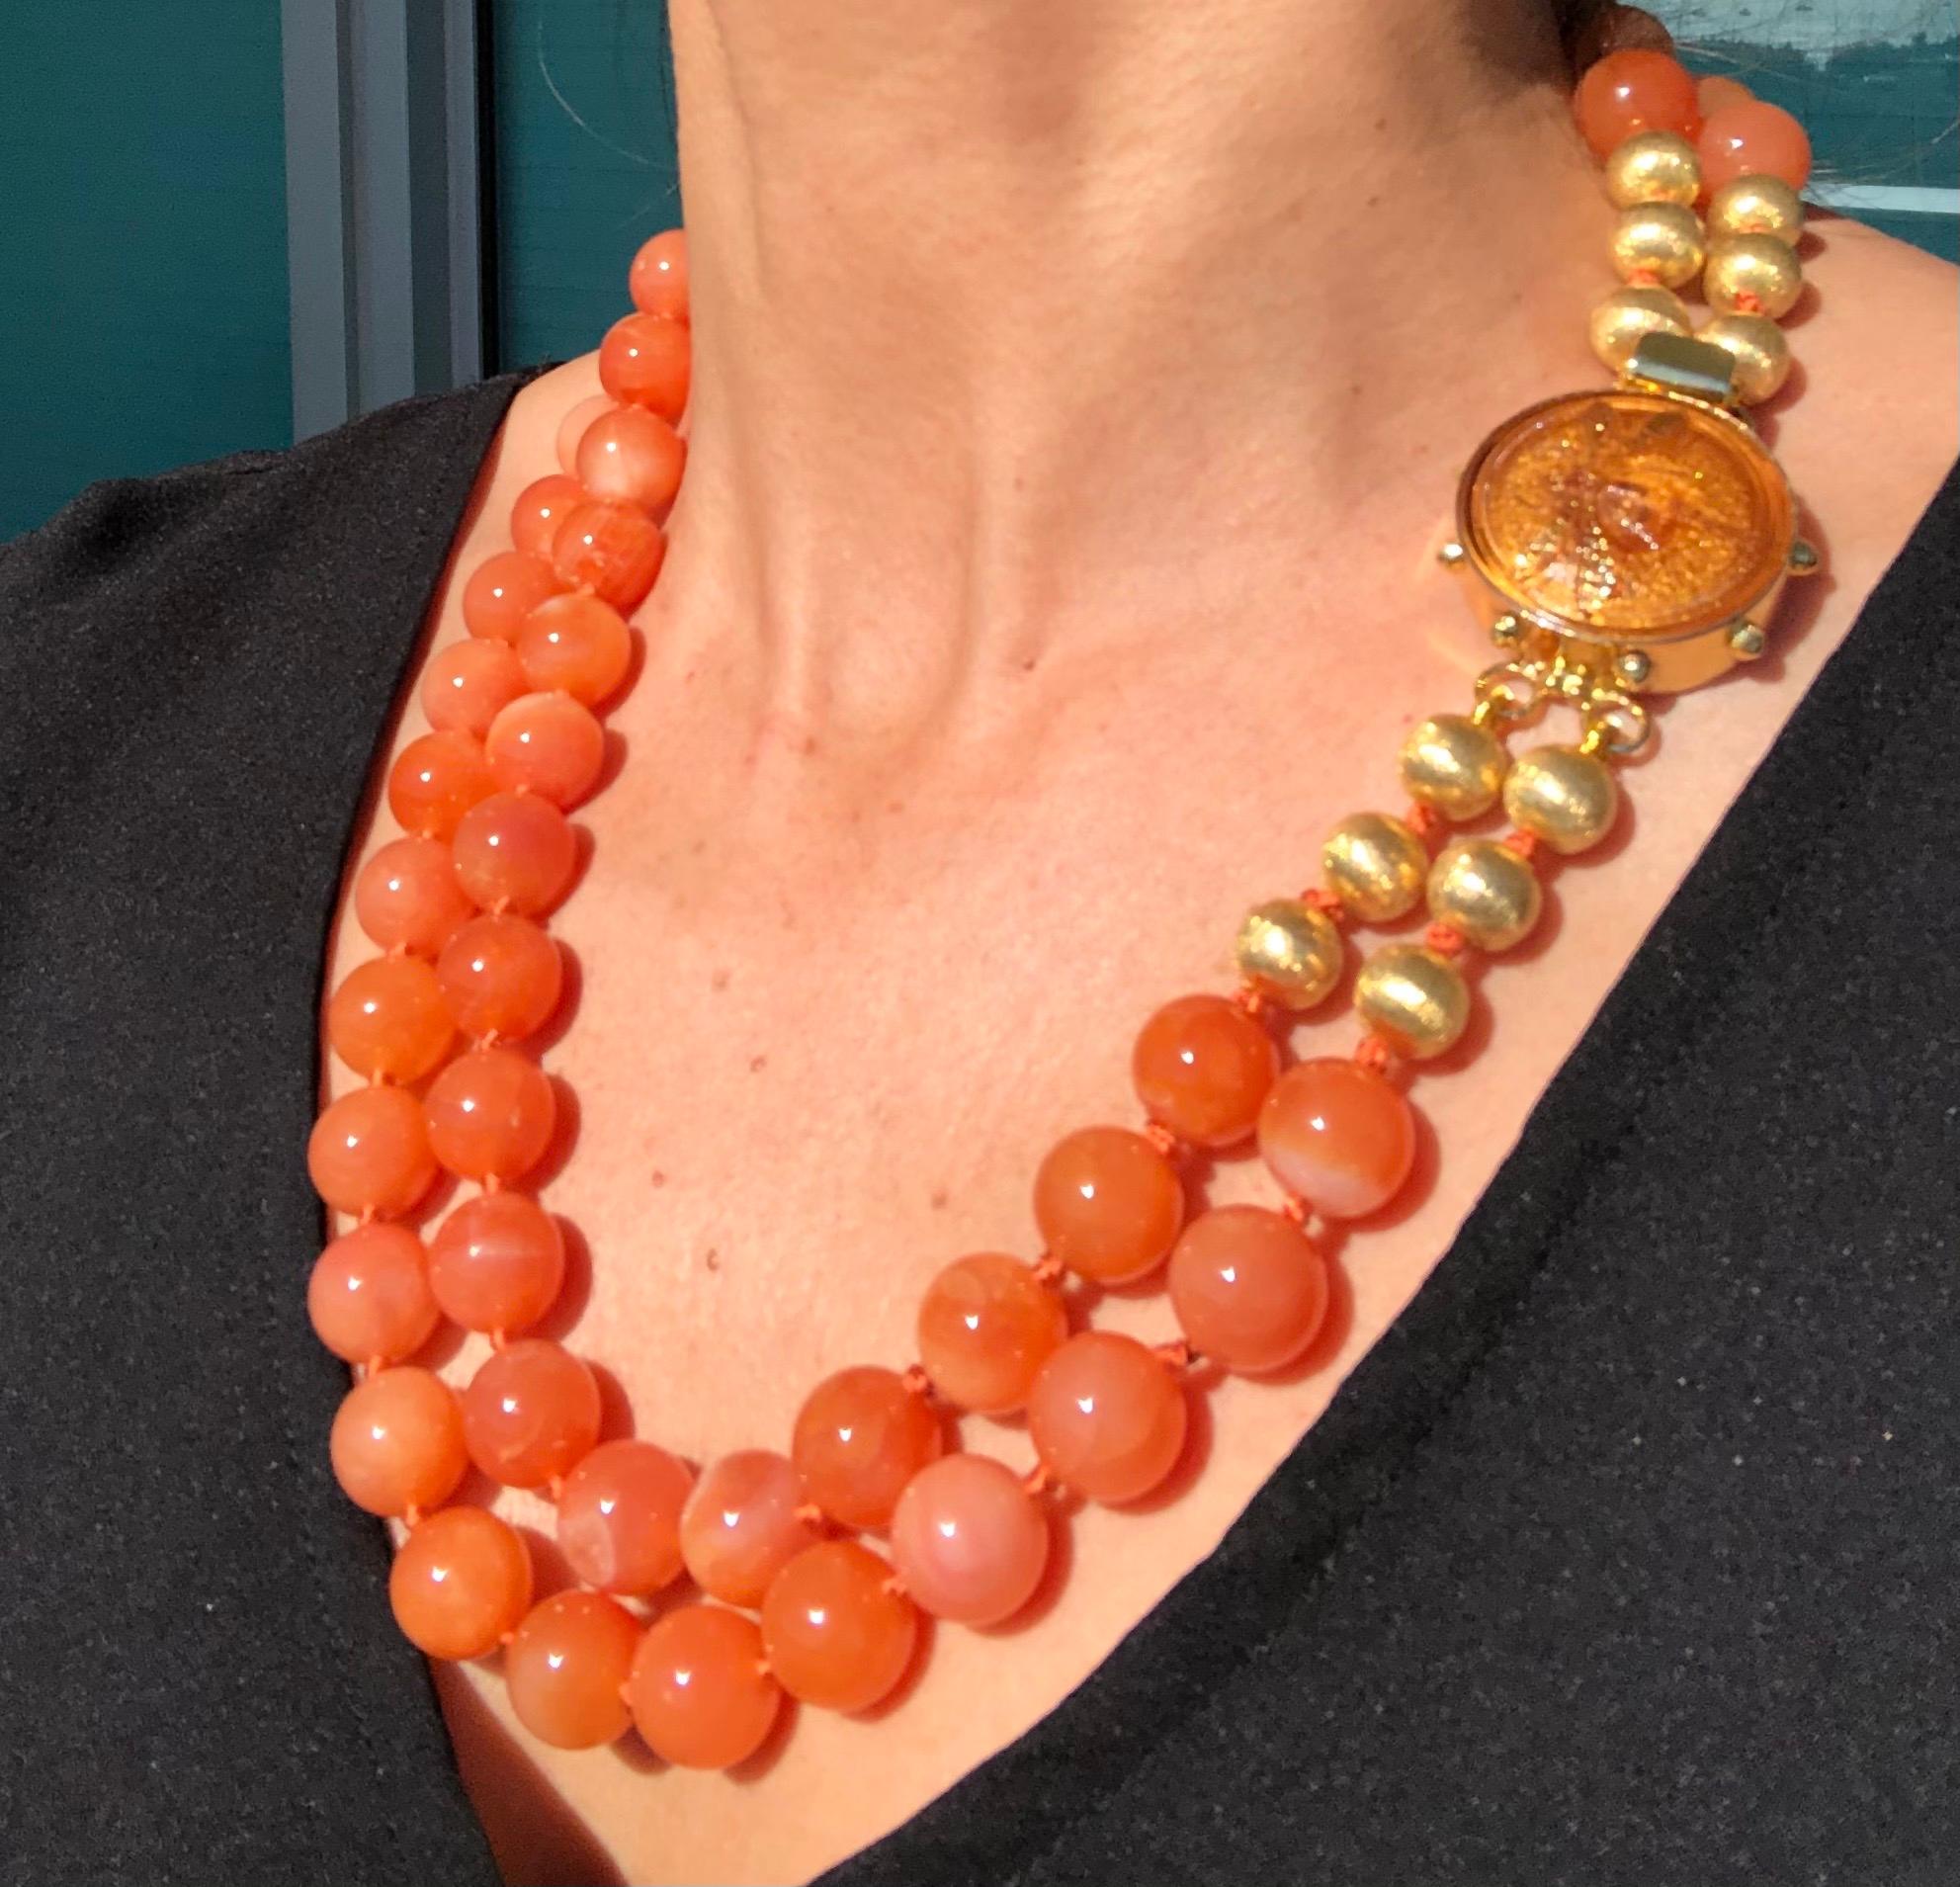 One-of-a-Kind
What a hard to describe color! Is there such a thing as a creamy orange? At any rate, this 14mm double strand matinee length necklace is easy to wear with a rainbow of colors. The clasp is a perfect foil for the beads separated by six